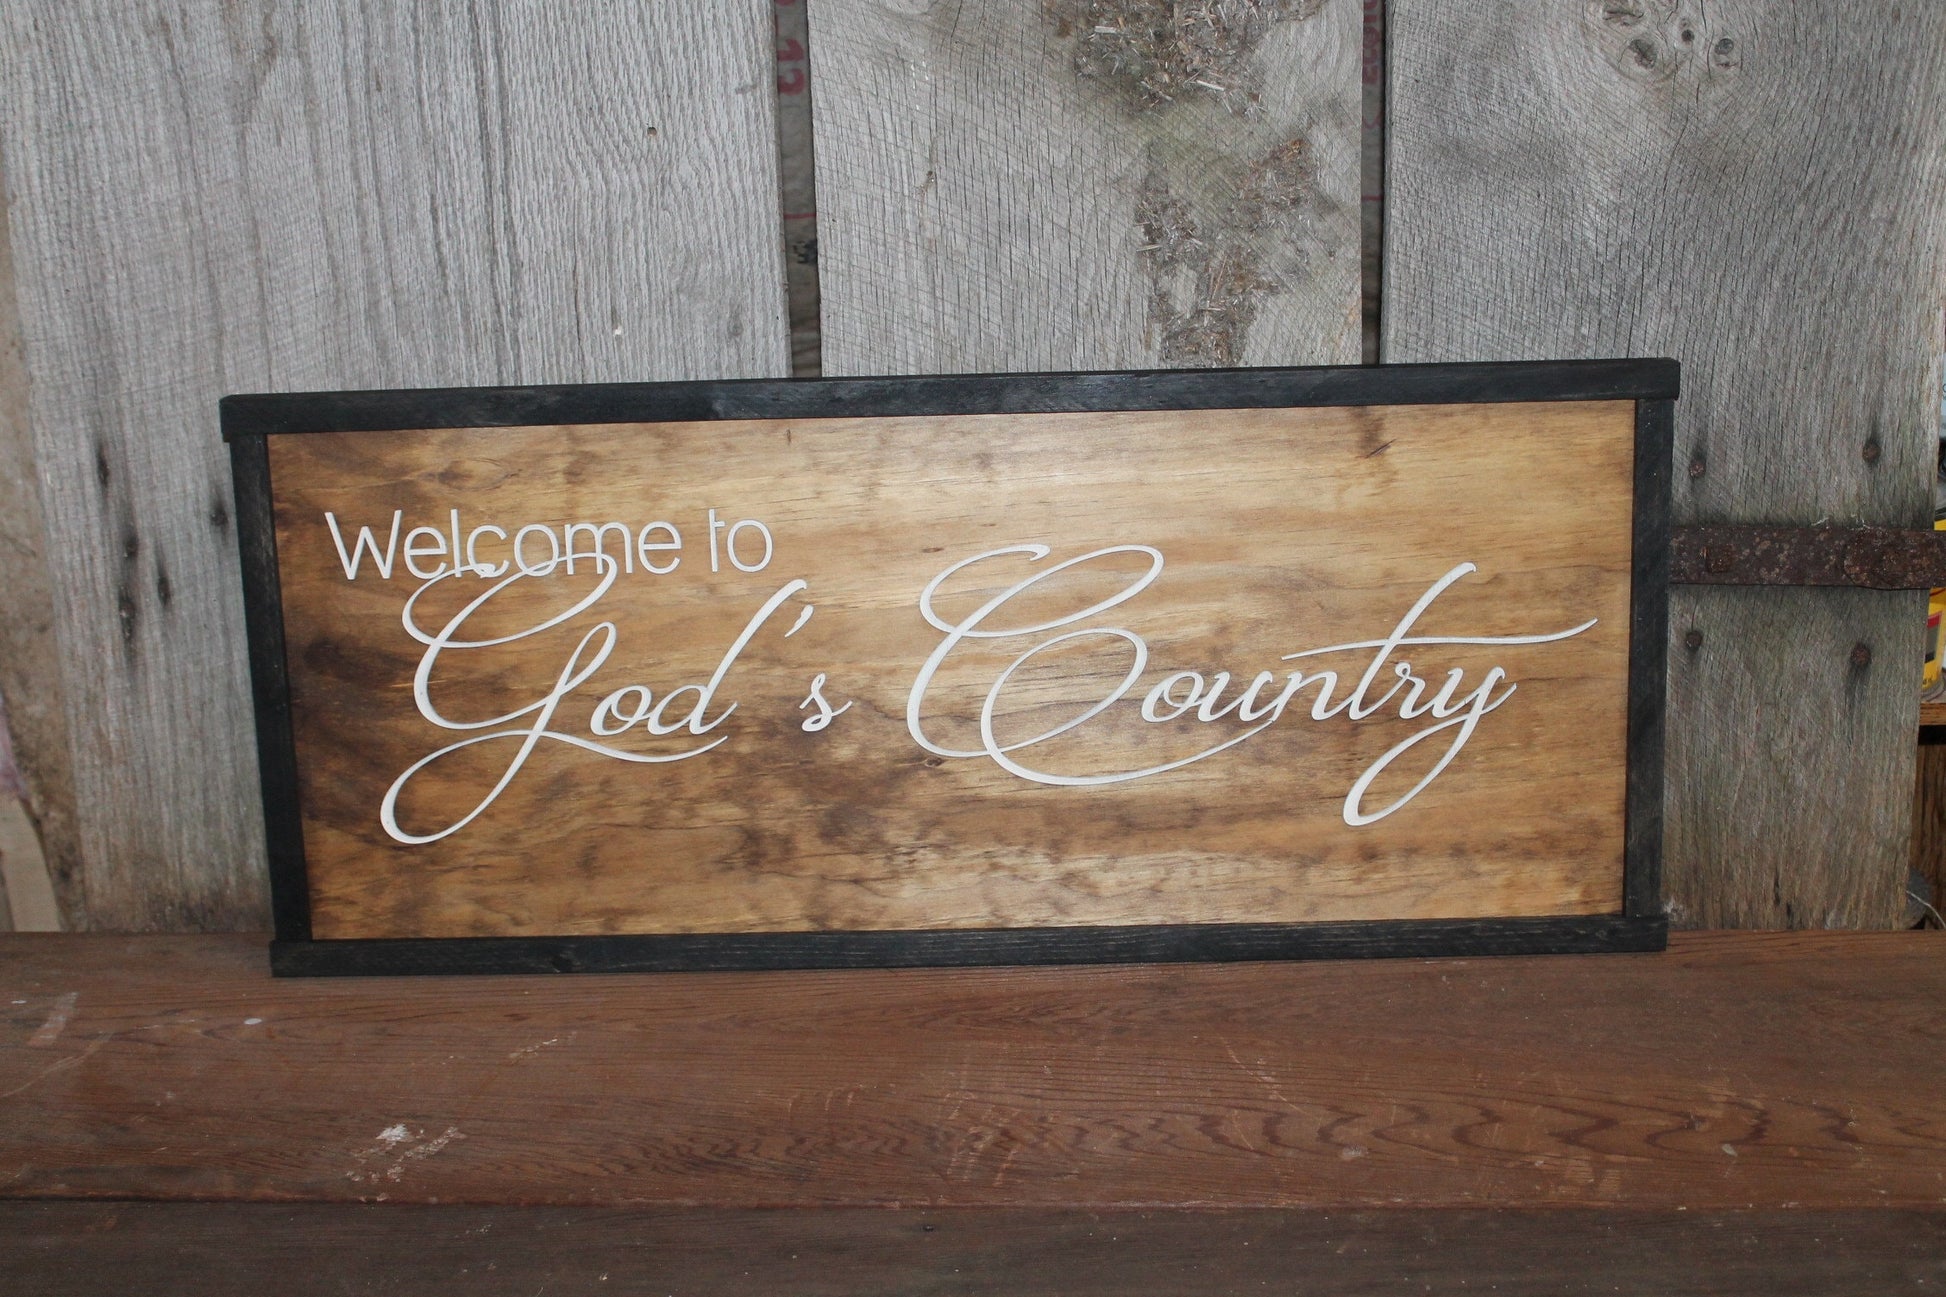 God's Country Entrance Sign Welcome Sign 3D Raised Entrance Sign Text Large Framed Sign Rustic Primitive Barn Wood Country